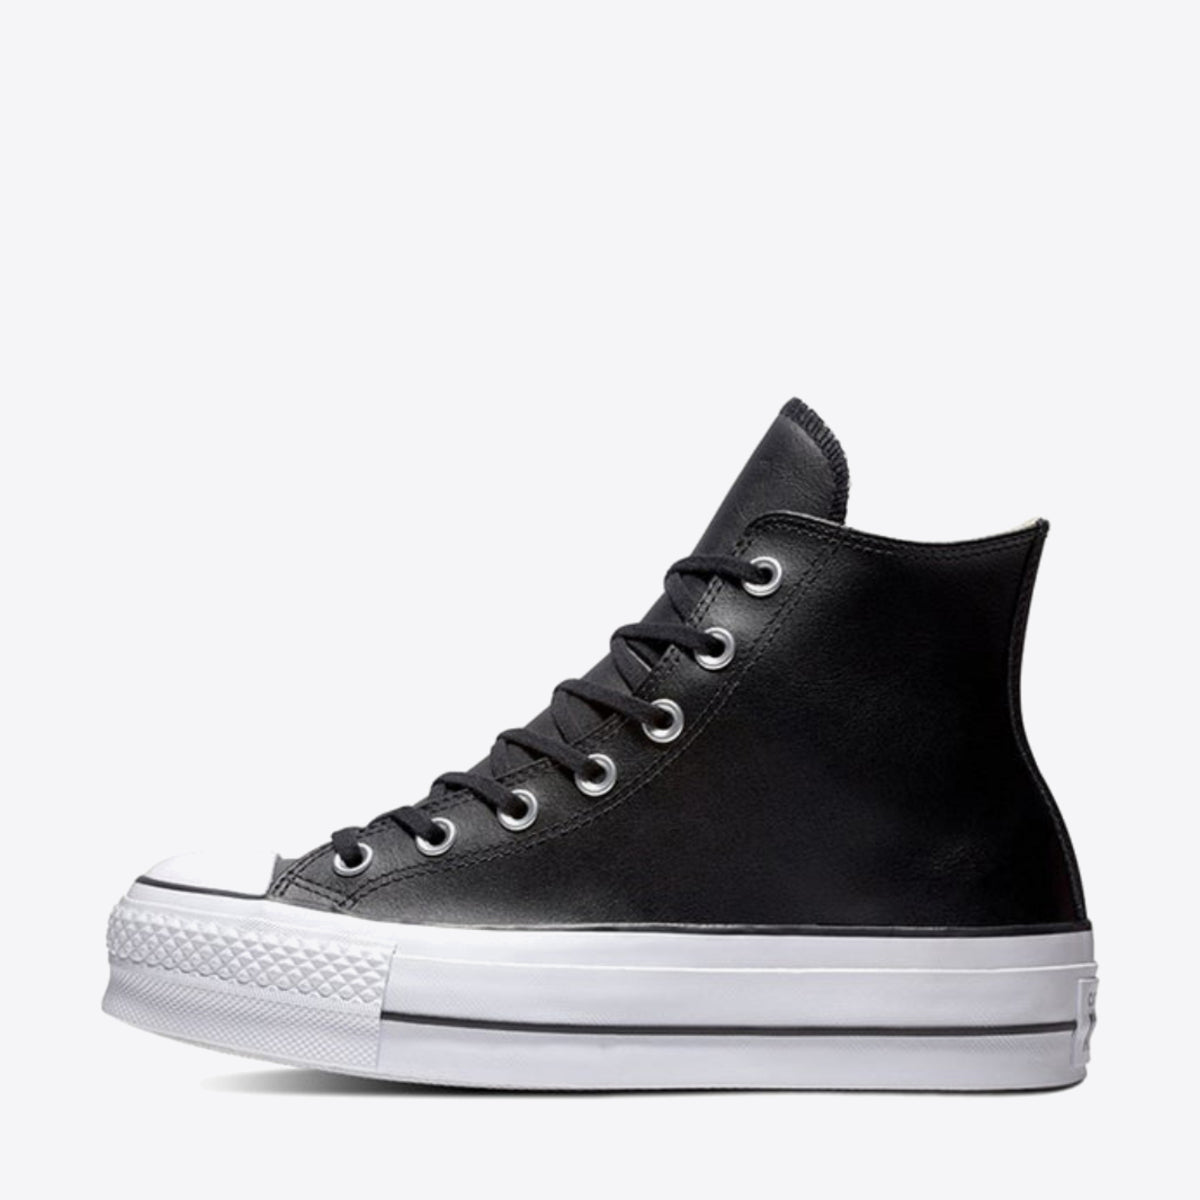 CONVERSE Chuck Taylor All Star Lift Leather High Black - Image 3